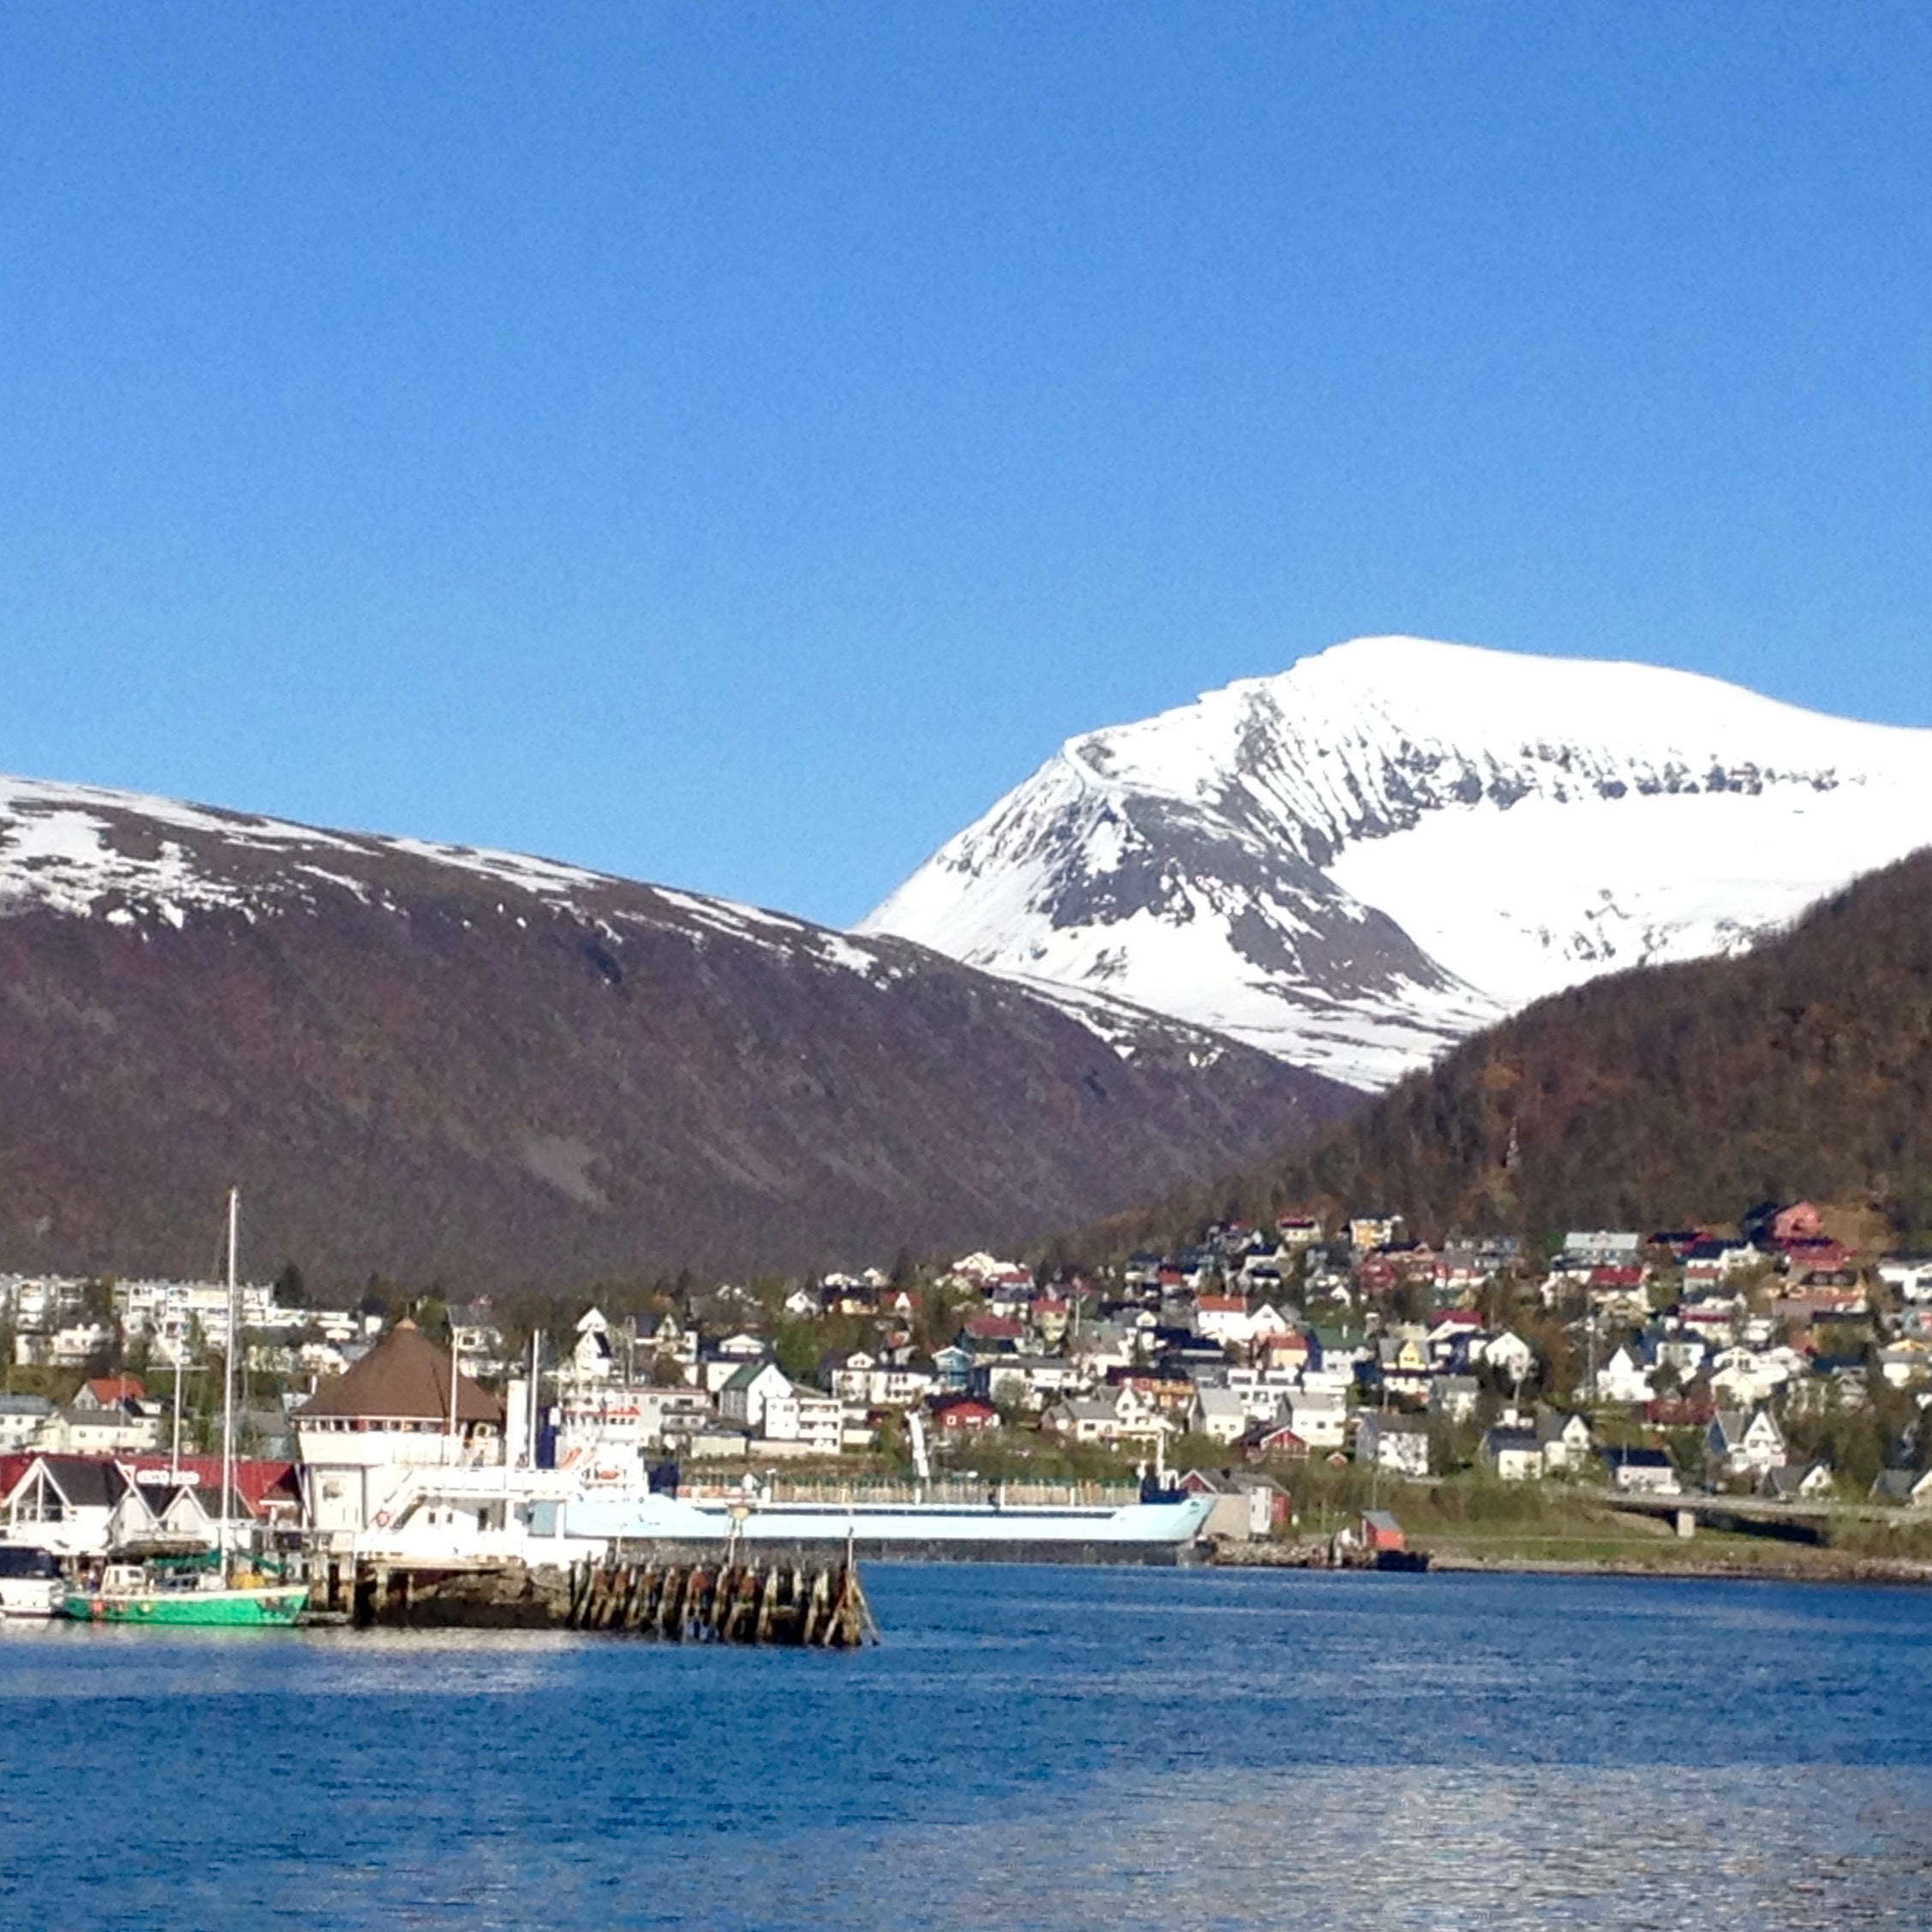 Sun, sea and snow in Tromsø during my visit to Norsk Polarinstitutt